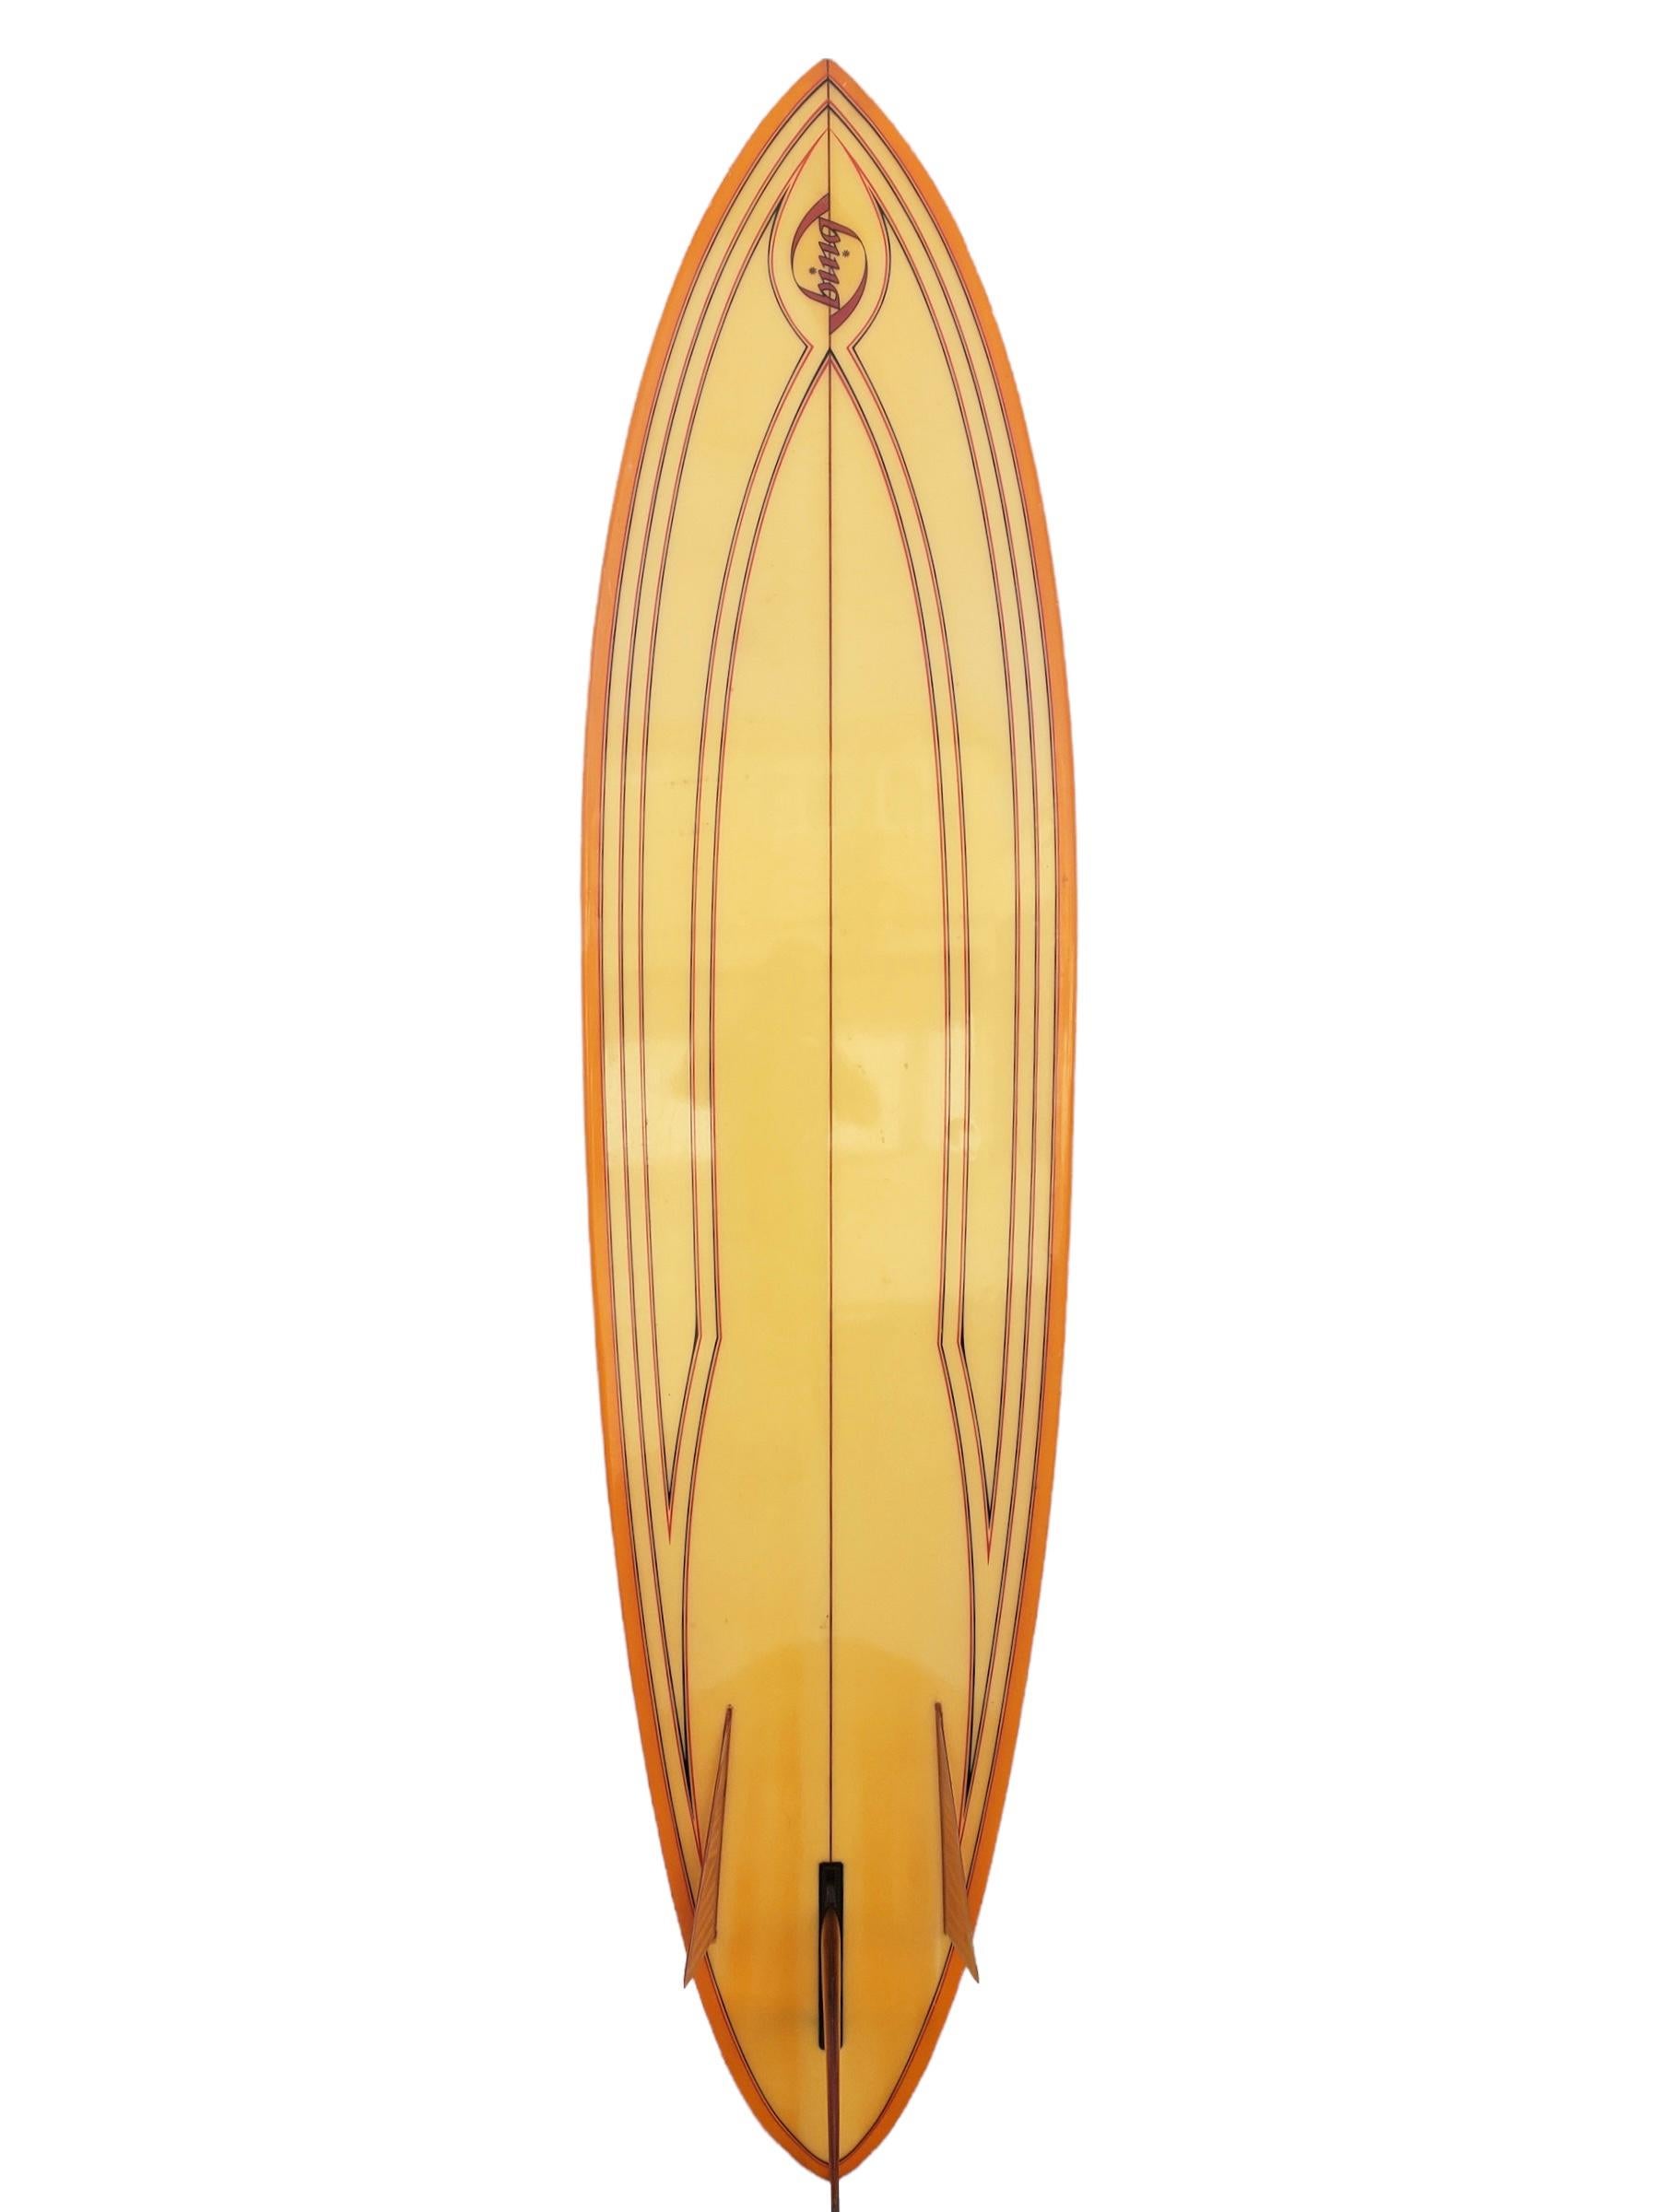 Early-mid 1970s Bing Surfboards 7’6 Bonzer shaped by Mike Eaton. Features a beautiful orange tinted deck/rails with intricate pinstriped bottom complimented by amber colored fins. A remarkable example of a well preserved 1970s Bing Bonzer surfboard.